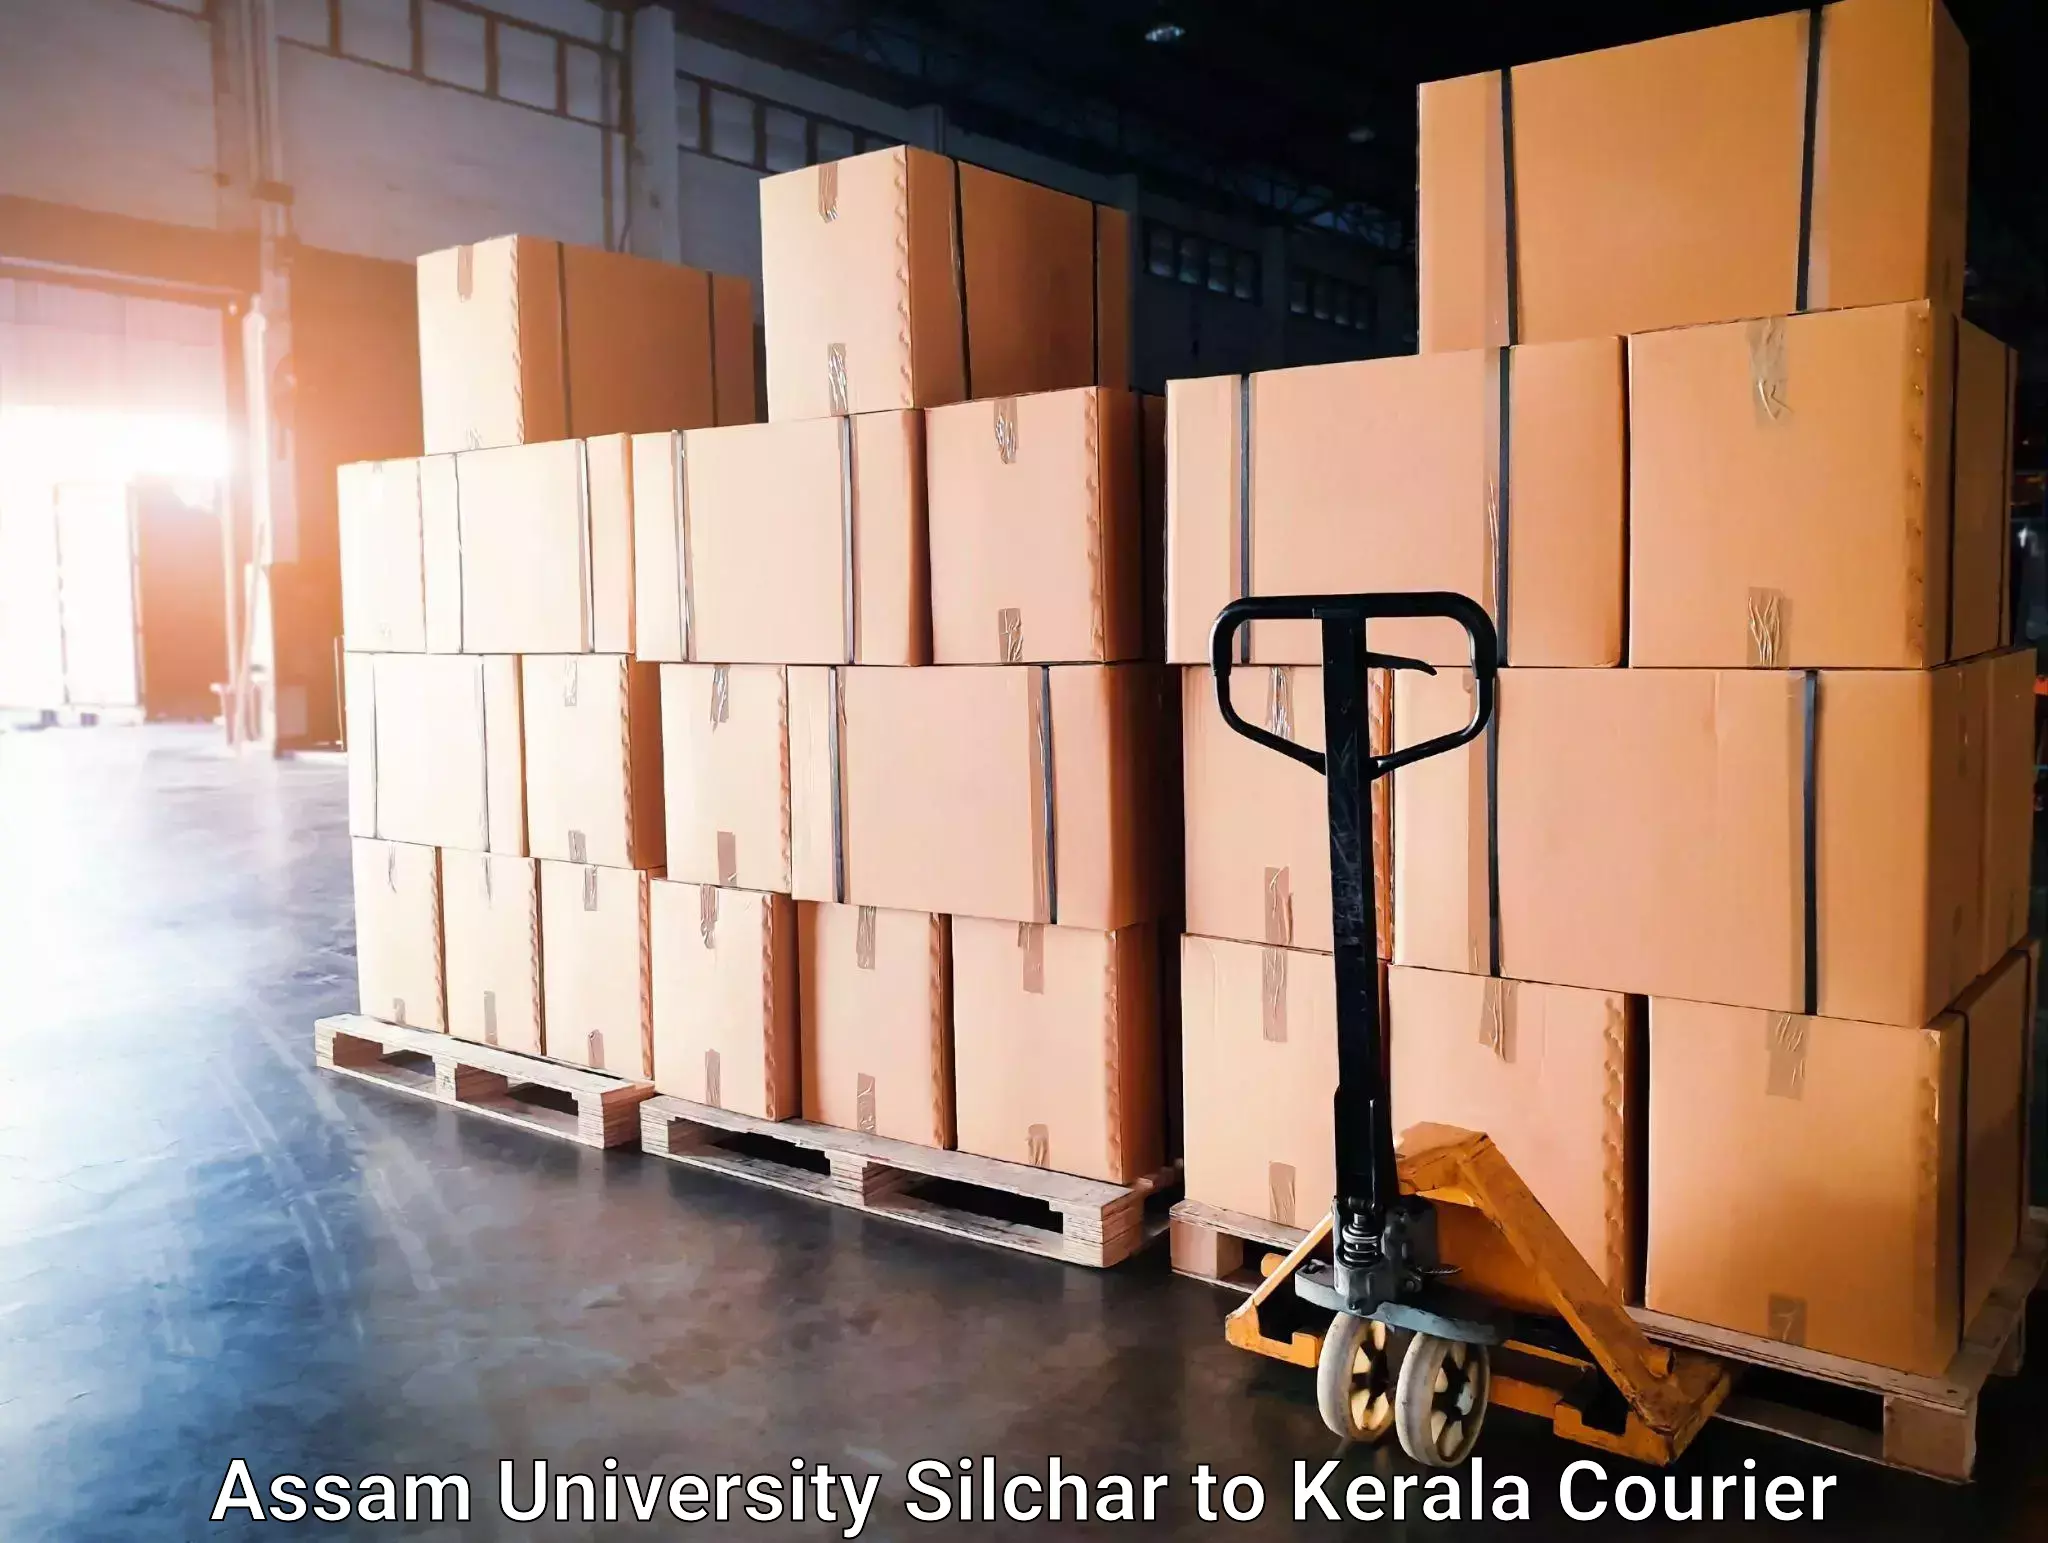 Package delivery network Assam University Silchar to Trivandrum